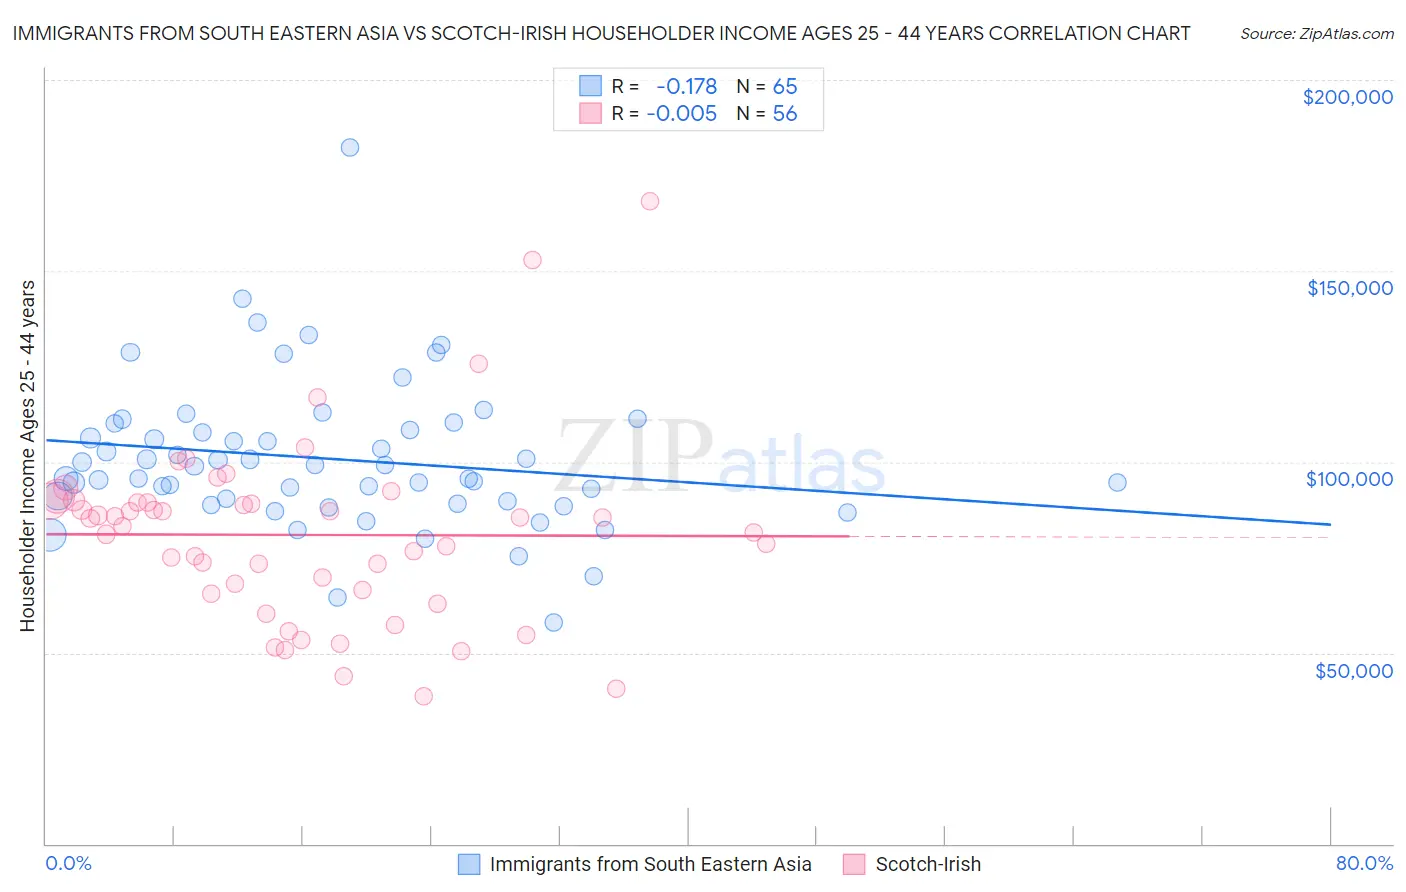 Immigrants from South Eastern Asia vs Scotch-Irish Householder Income Ages 25 - 44 years